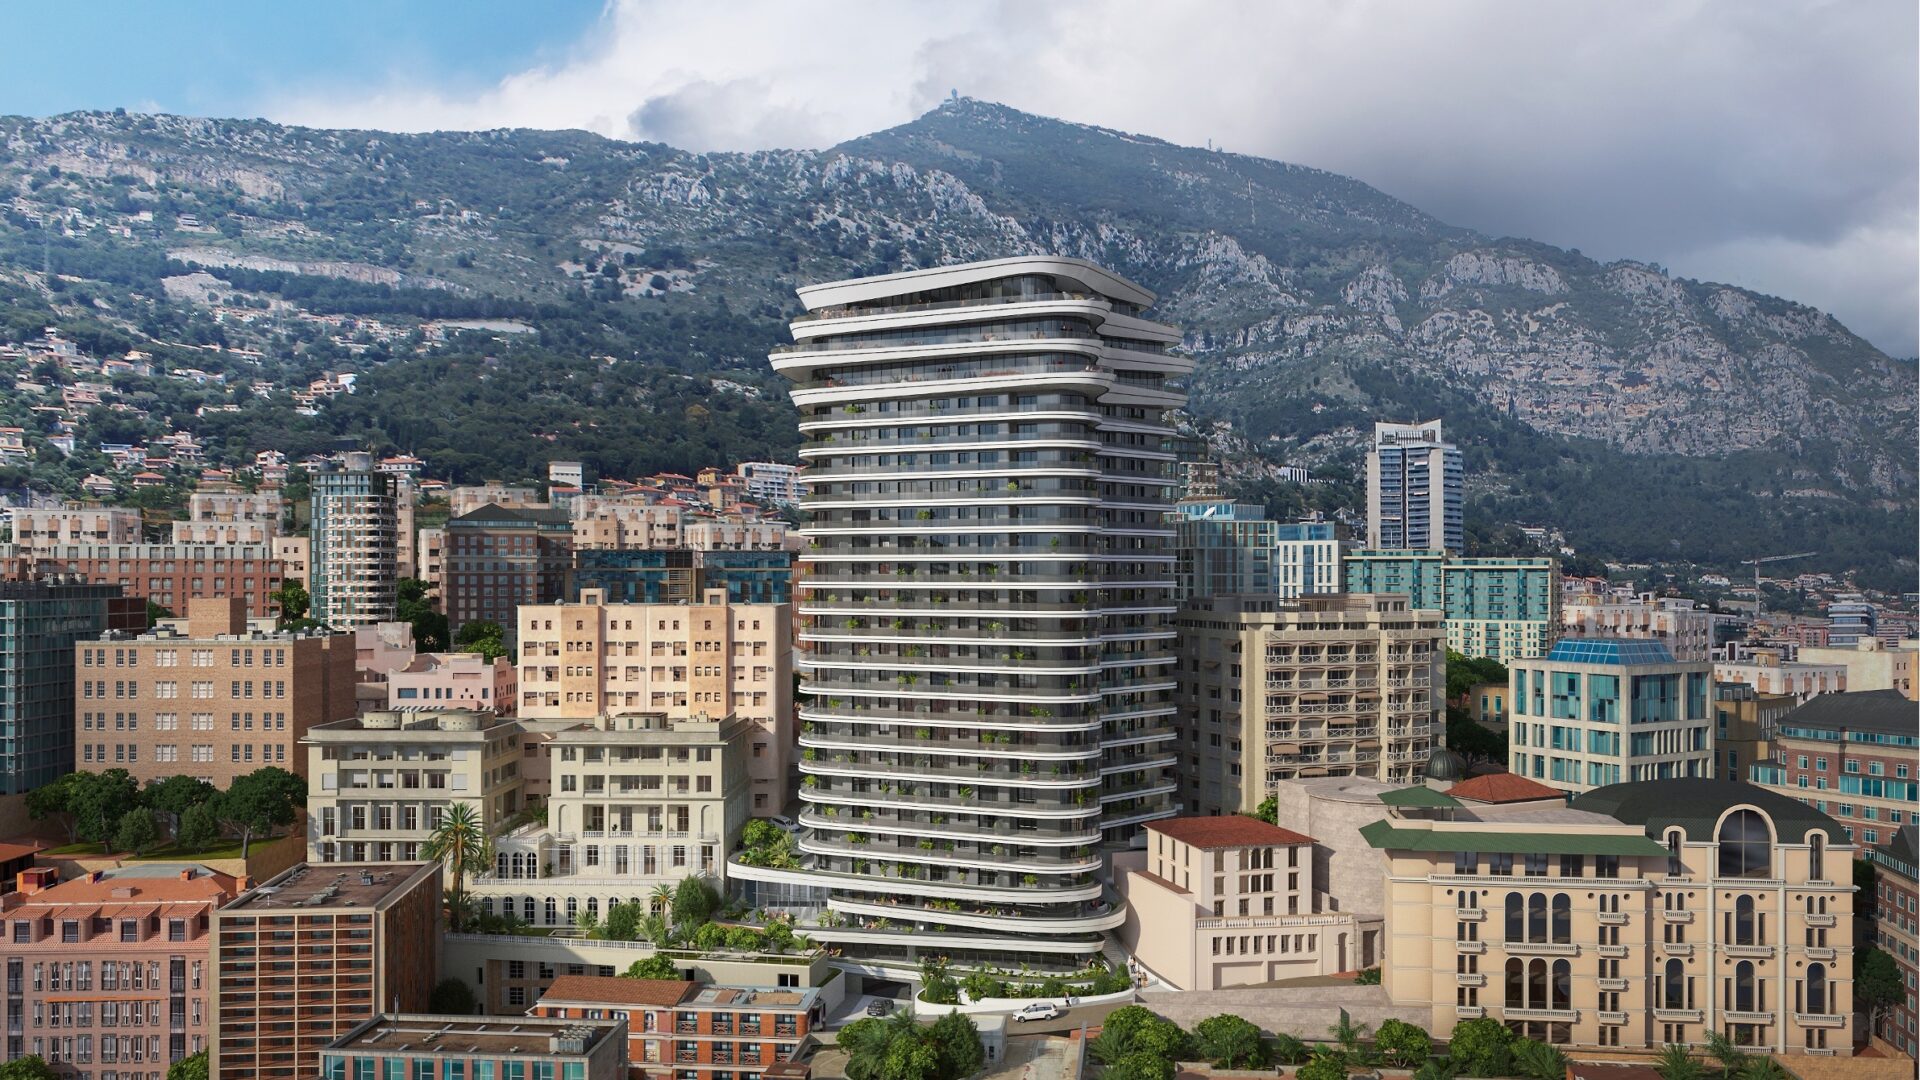 The new Schuylkill building in Monaco. It was designed by Zaha Hadid and Square Architects